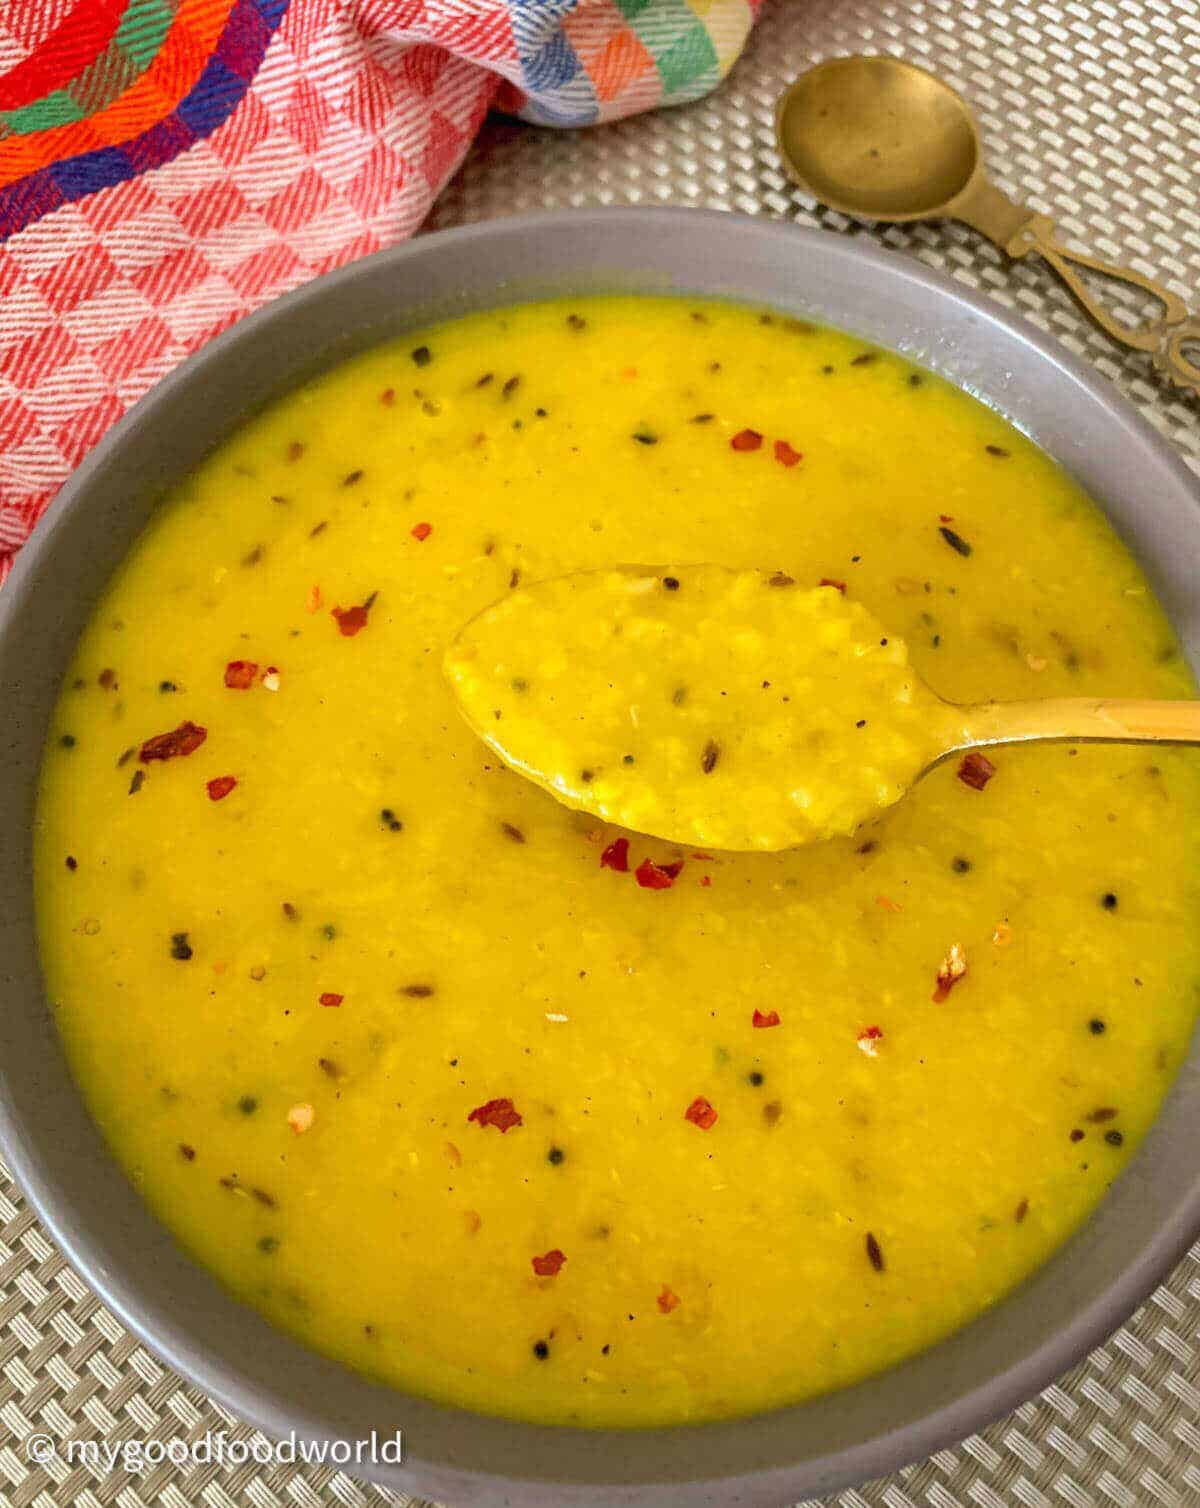 Moong dal soup is served in a round grey soup with a golden colored spoon scooping out some of the soup.